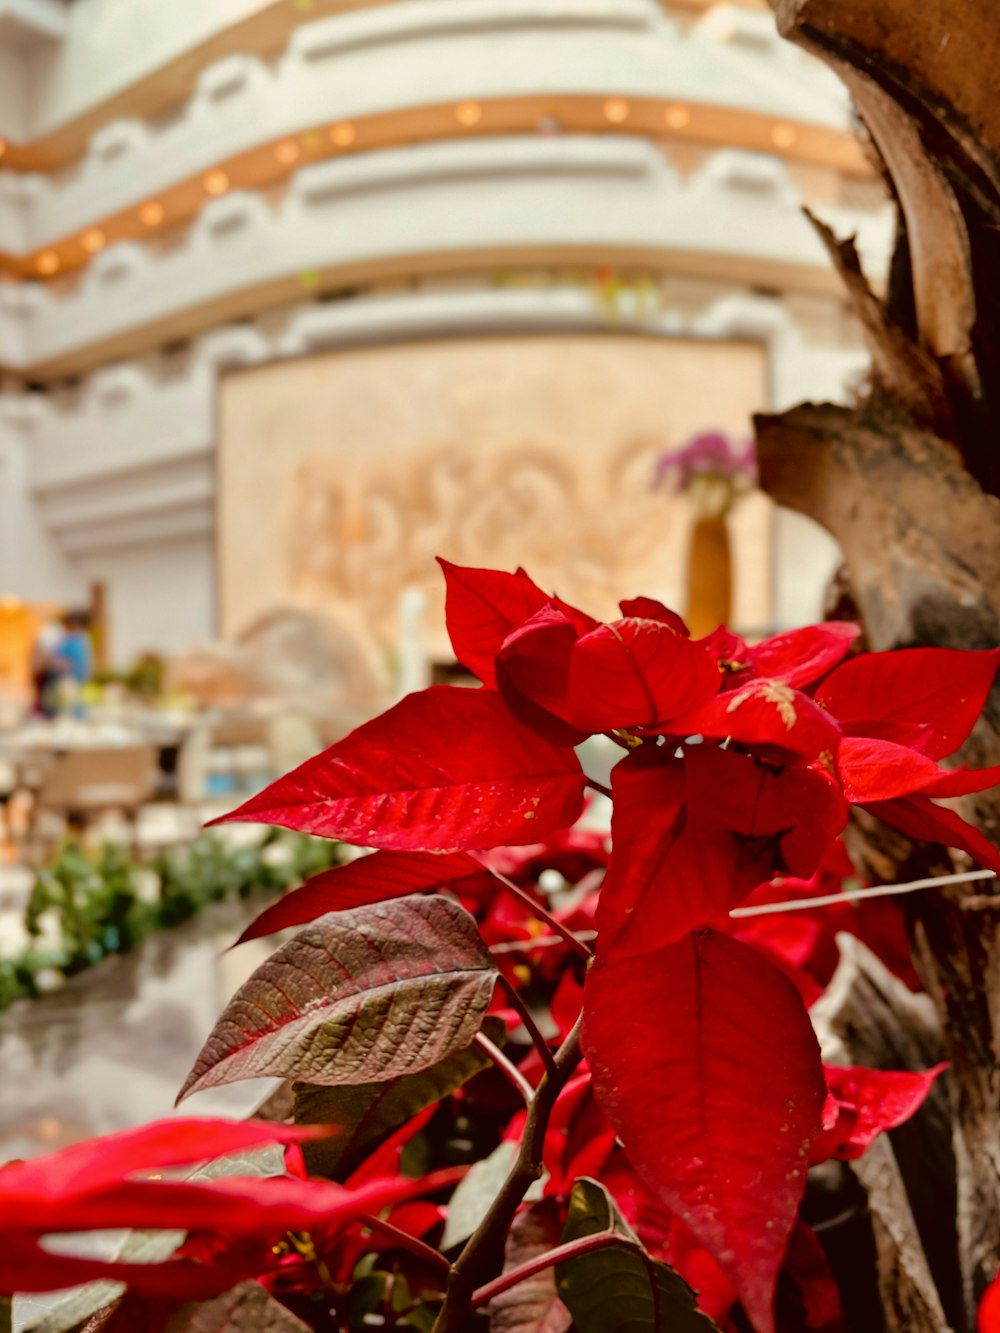 a poinsettia plant with red leaves in a lobby